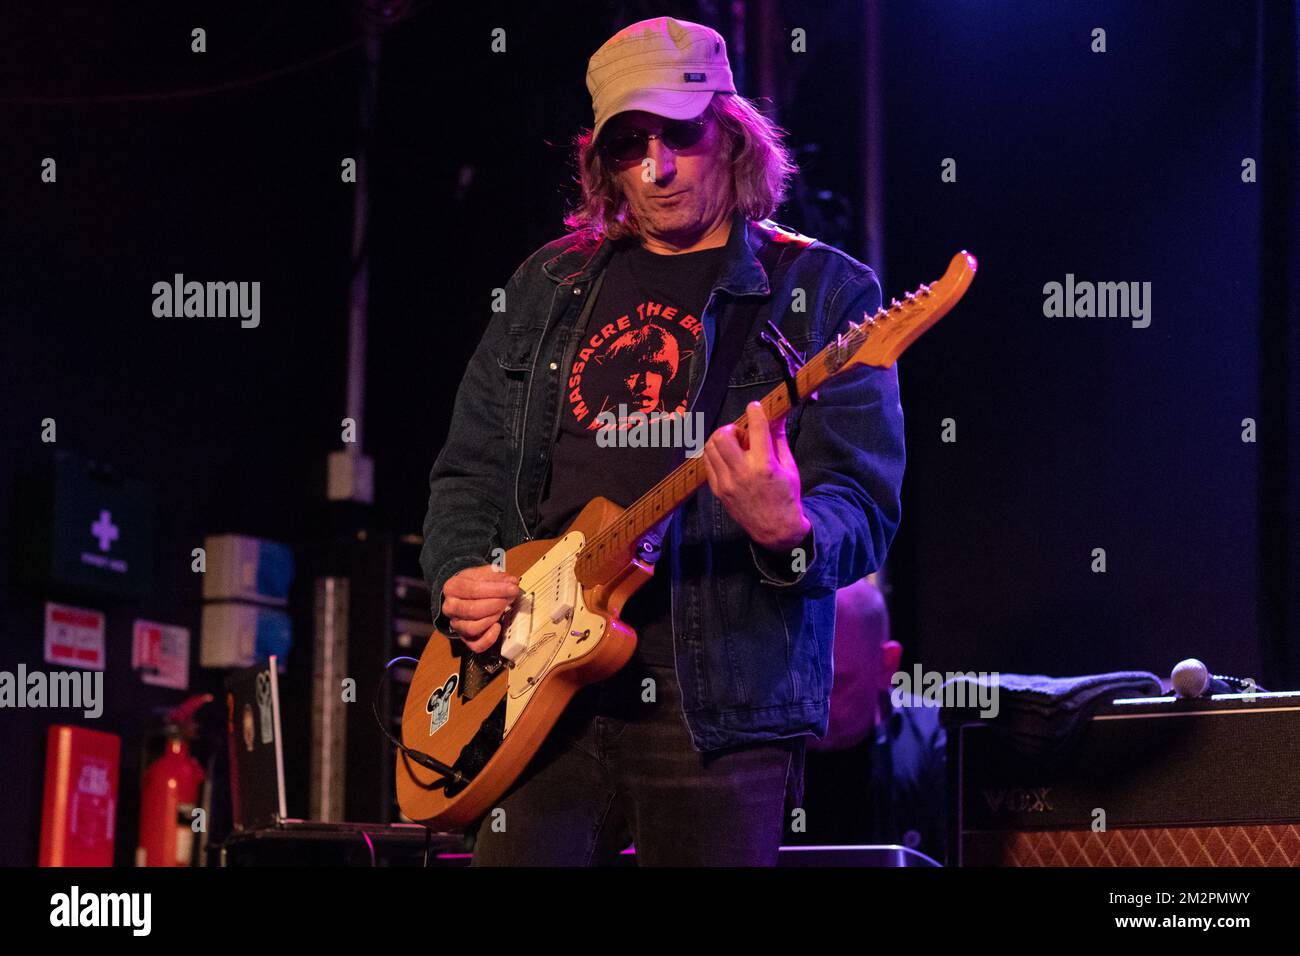 Oxford, United Kingdom. 12th, December 2022. The English rock band The Chameleons performs a live concert at the O2 Academy Oxford in Oxford. Here guitarist Neil Dwerryhouse is seen live on stage. (Photo credit: Gonzales Photo – Per-Otto Oppi). Stock Photo